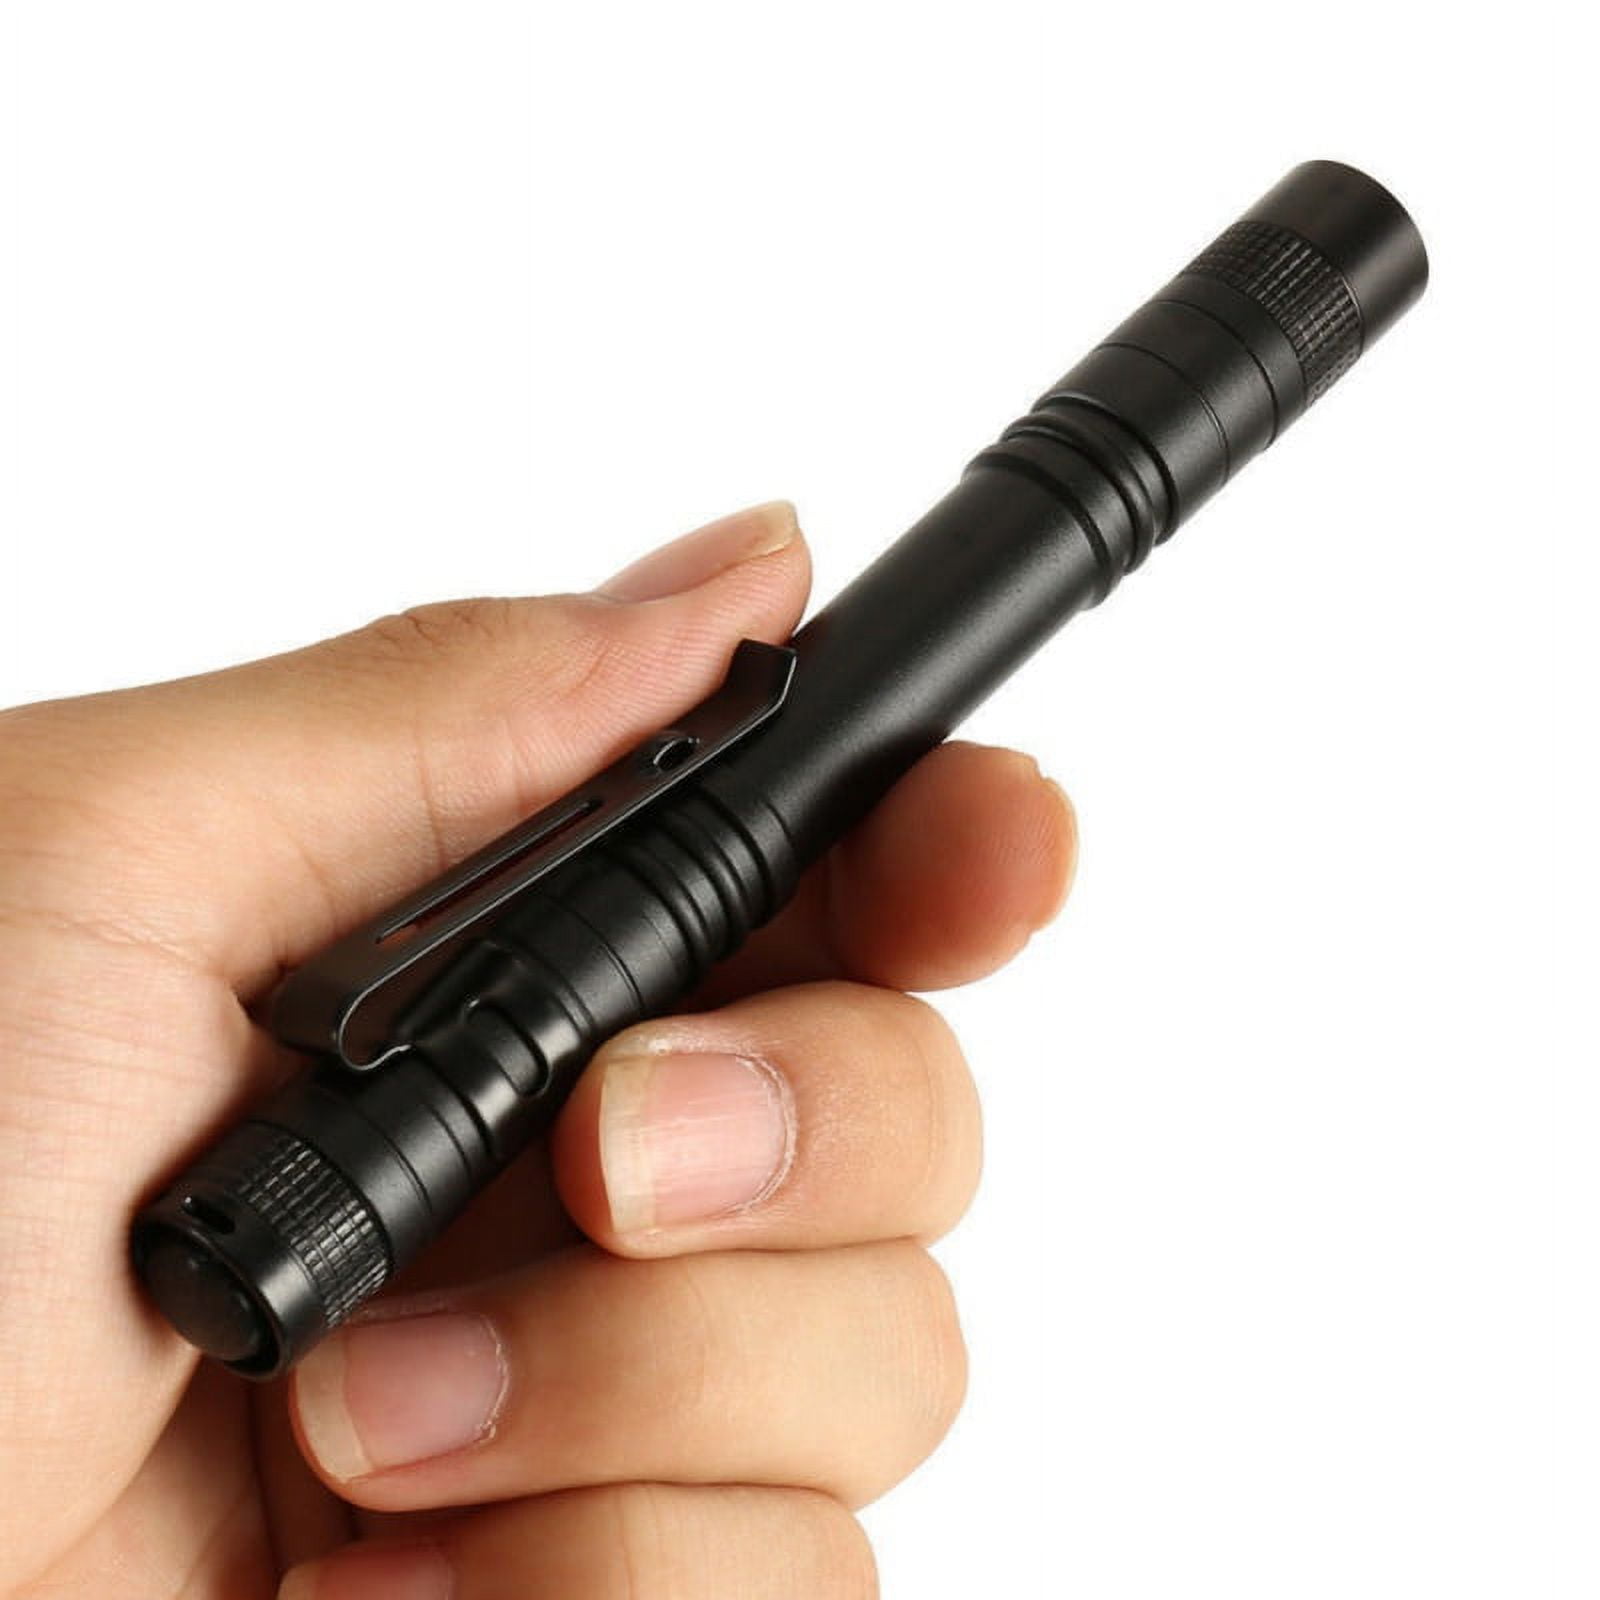 Super Small Mini LED Flashlight Battery-Powered Handheld Pen Light Tactical  Pocket Torch with High Lumens for Camping, Outdoor, Emergency, Everyday  Flashlights, 5.23 Inch